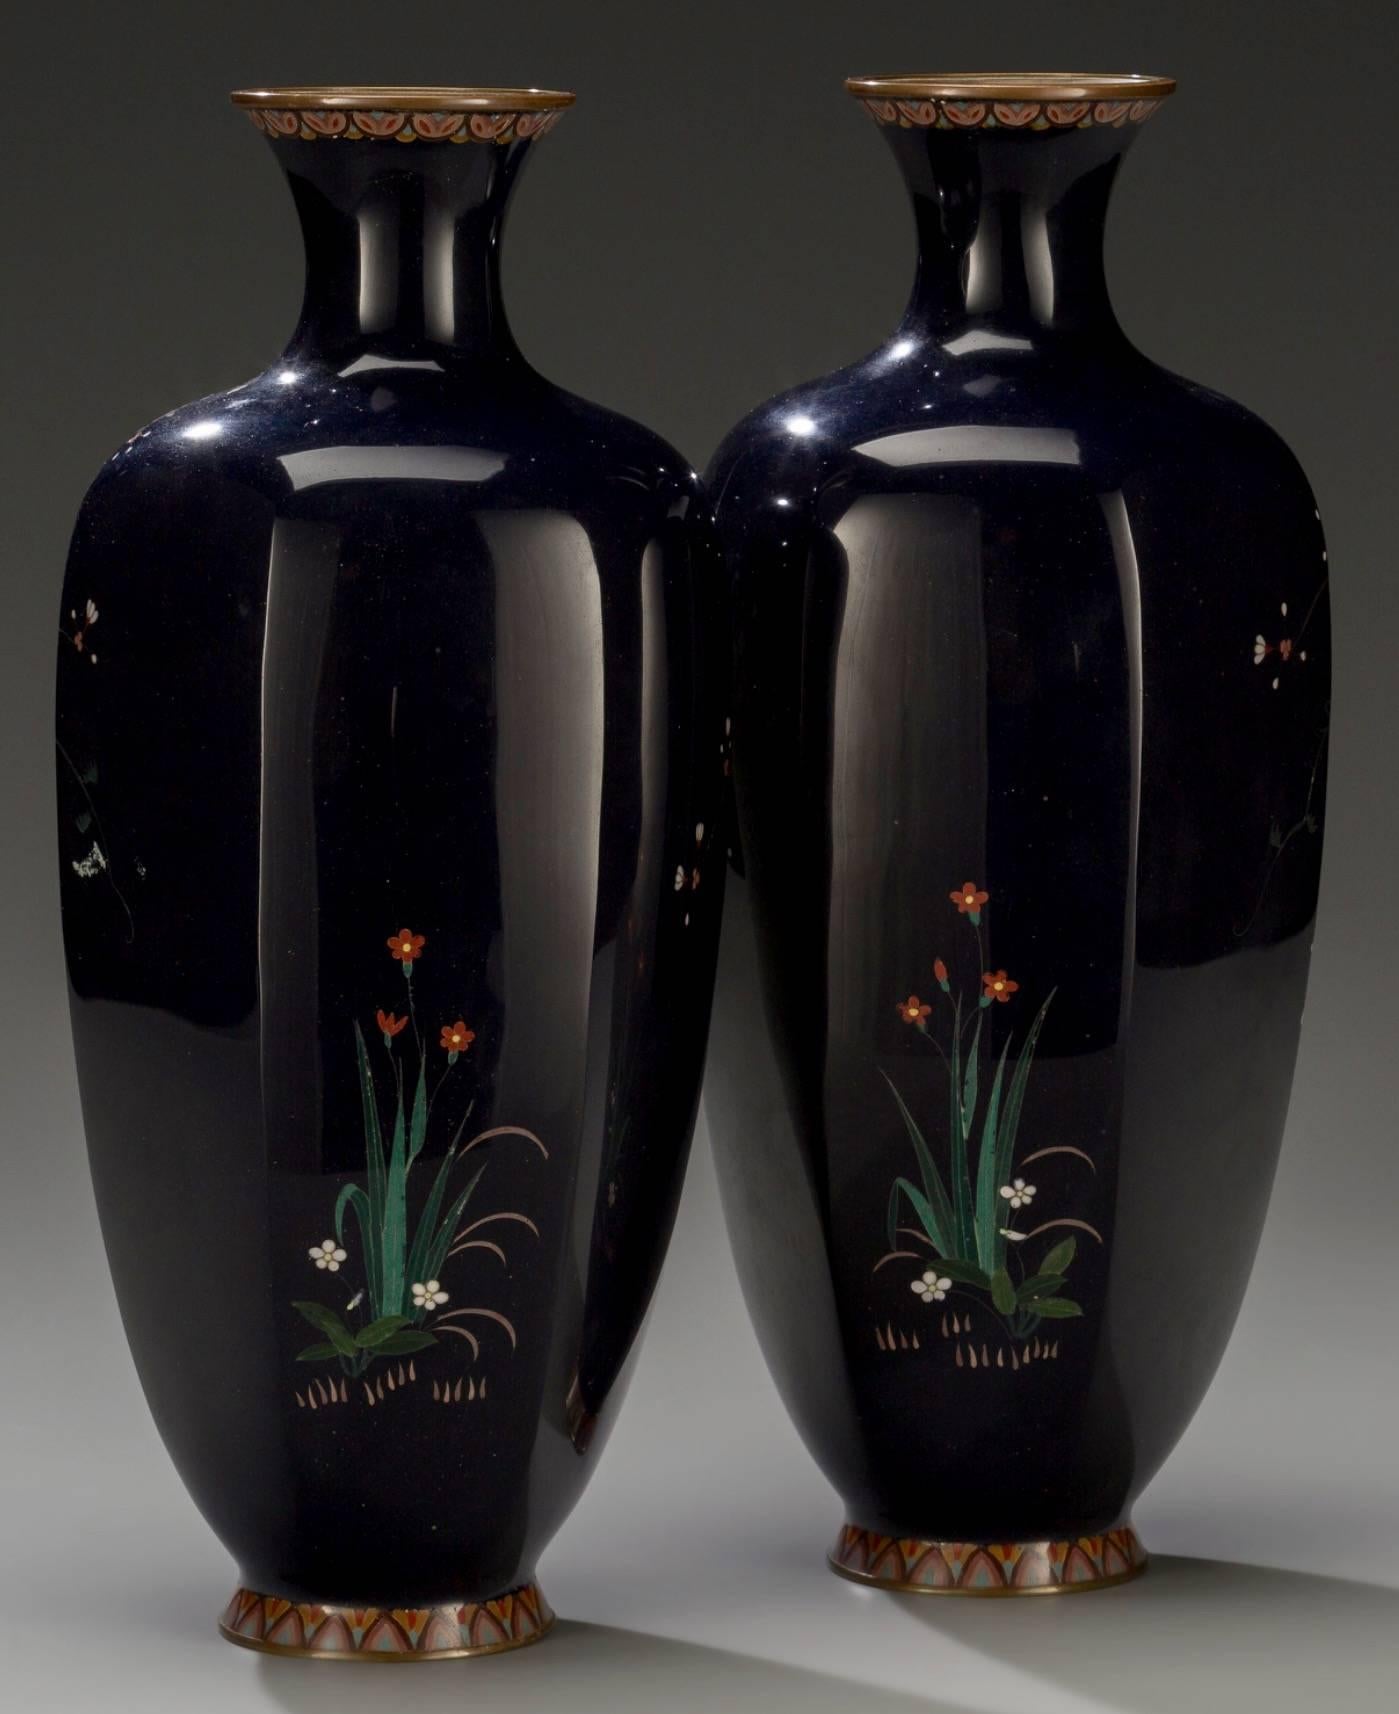 A pair of Japanese Cloisonné enamel hexagonal vases by Hayashi Chuzo Kodenji Workshop, Meiji period.
Marks: (Character mark to underside).
Measures: 12 inches high (30.5 cm).

Each vase decorated with a large hawk perched on blossoming branches